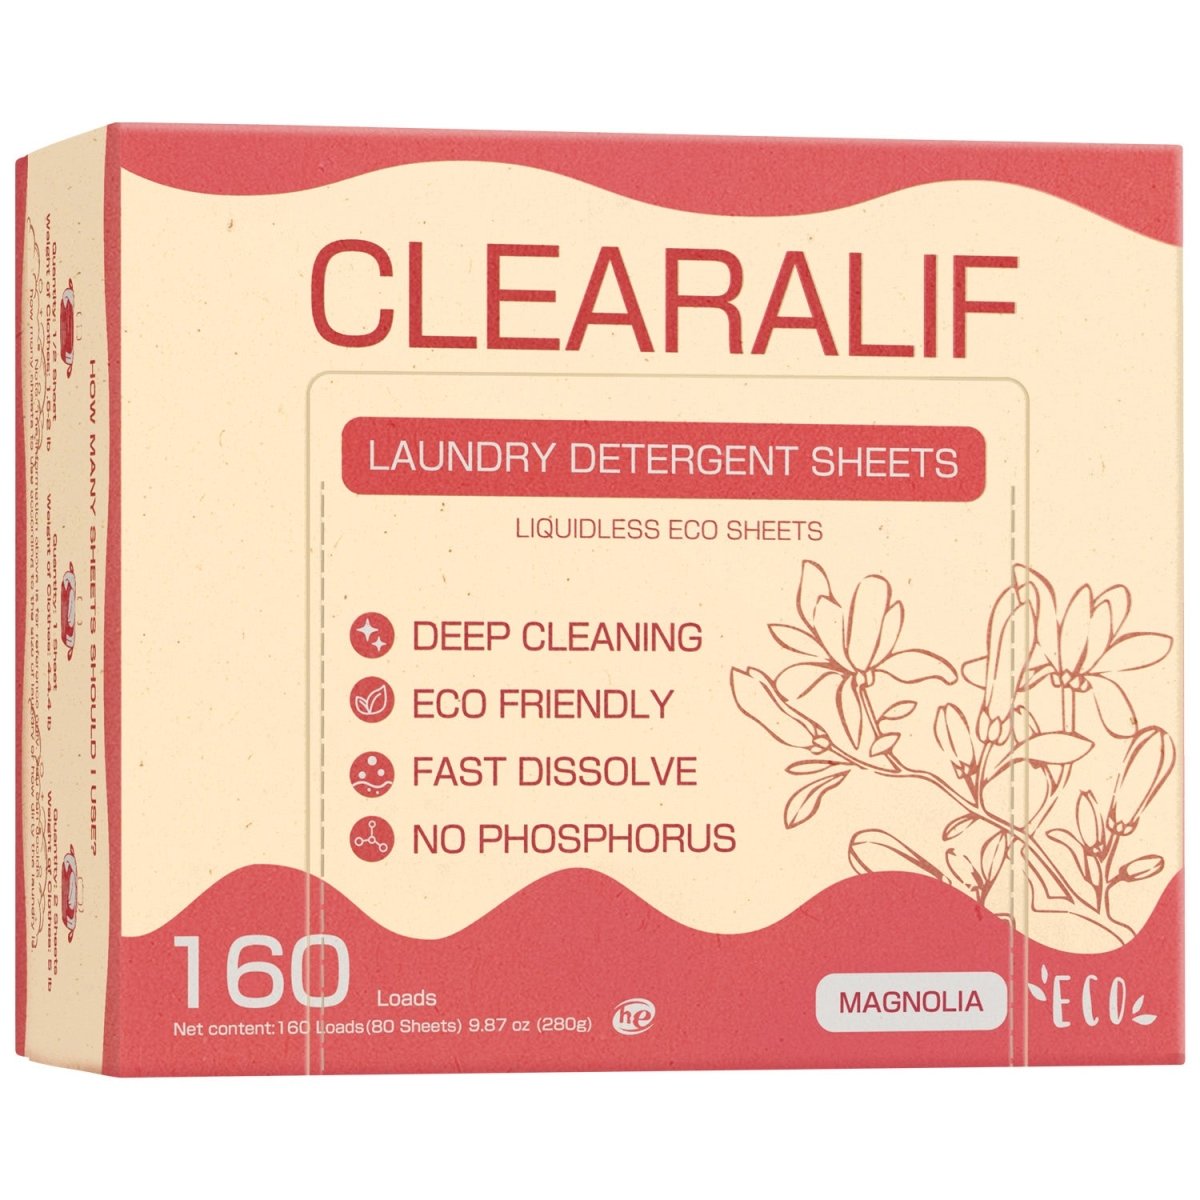 CLEARALIF Wholesale Eco Friendly & Hypoallergenic Laundry Detergent Sheets - CLEARALIF